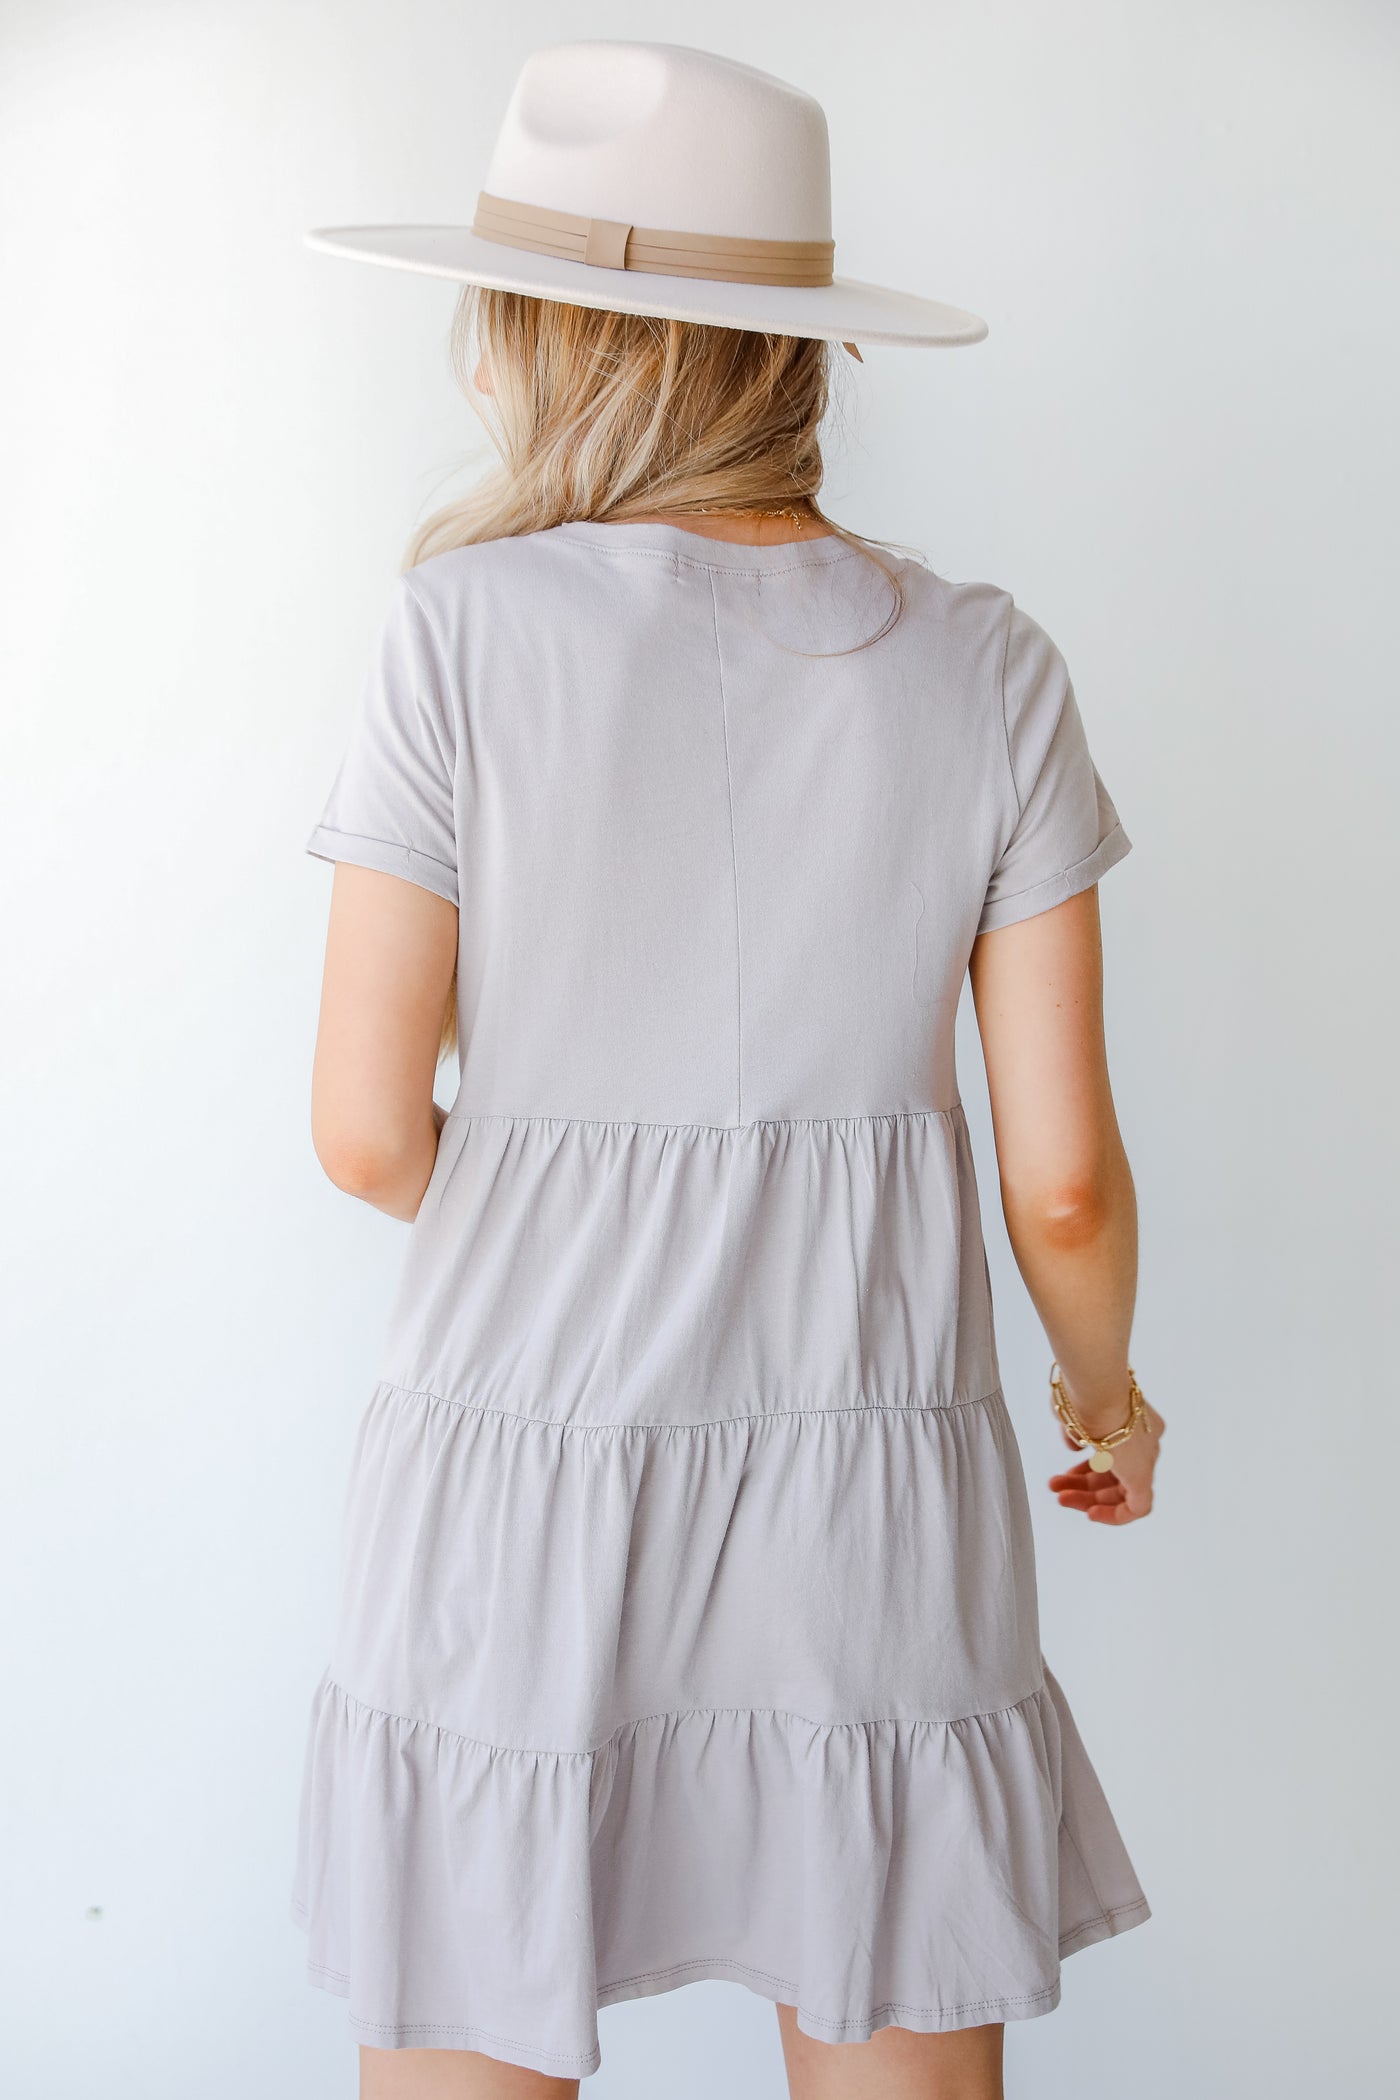 Tiered Mini Dress in grey back view